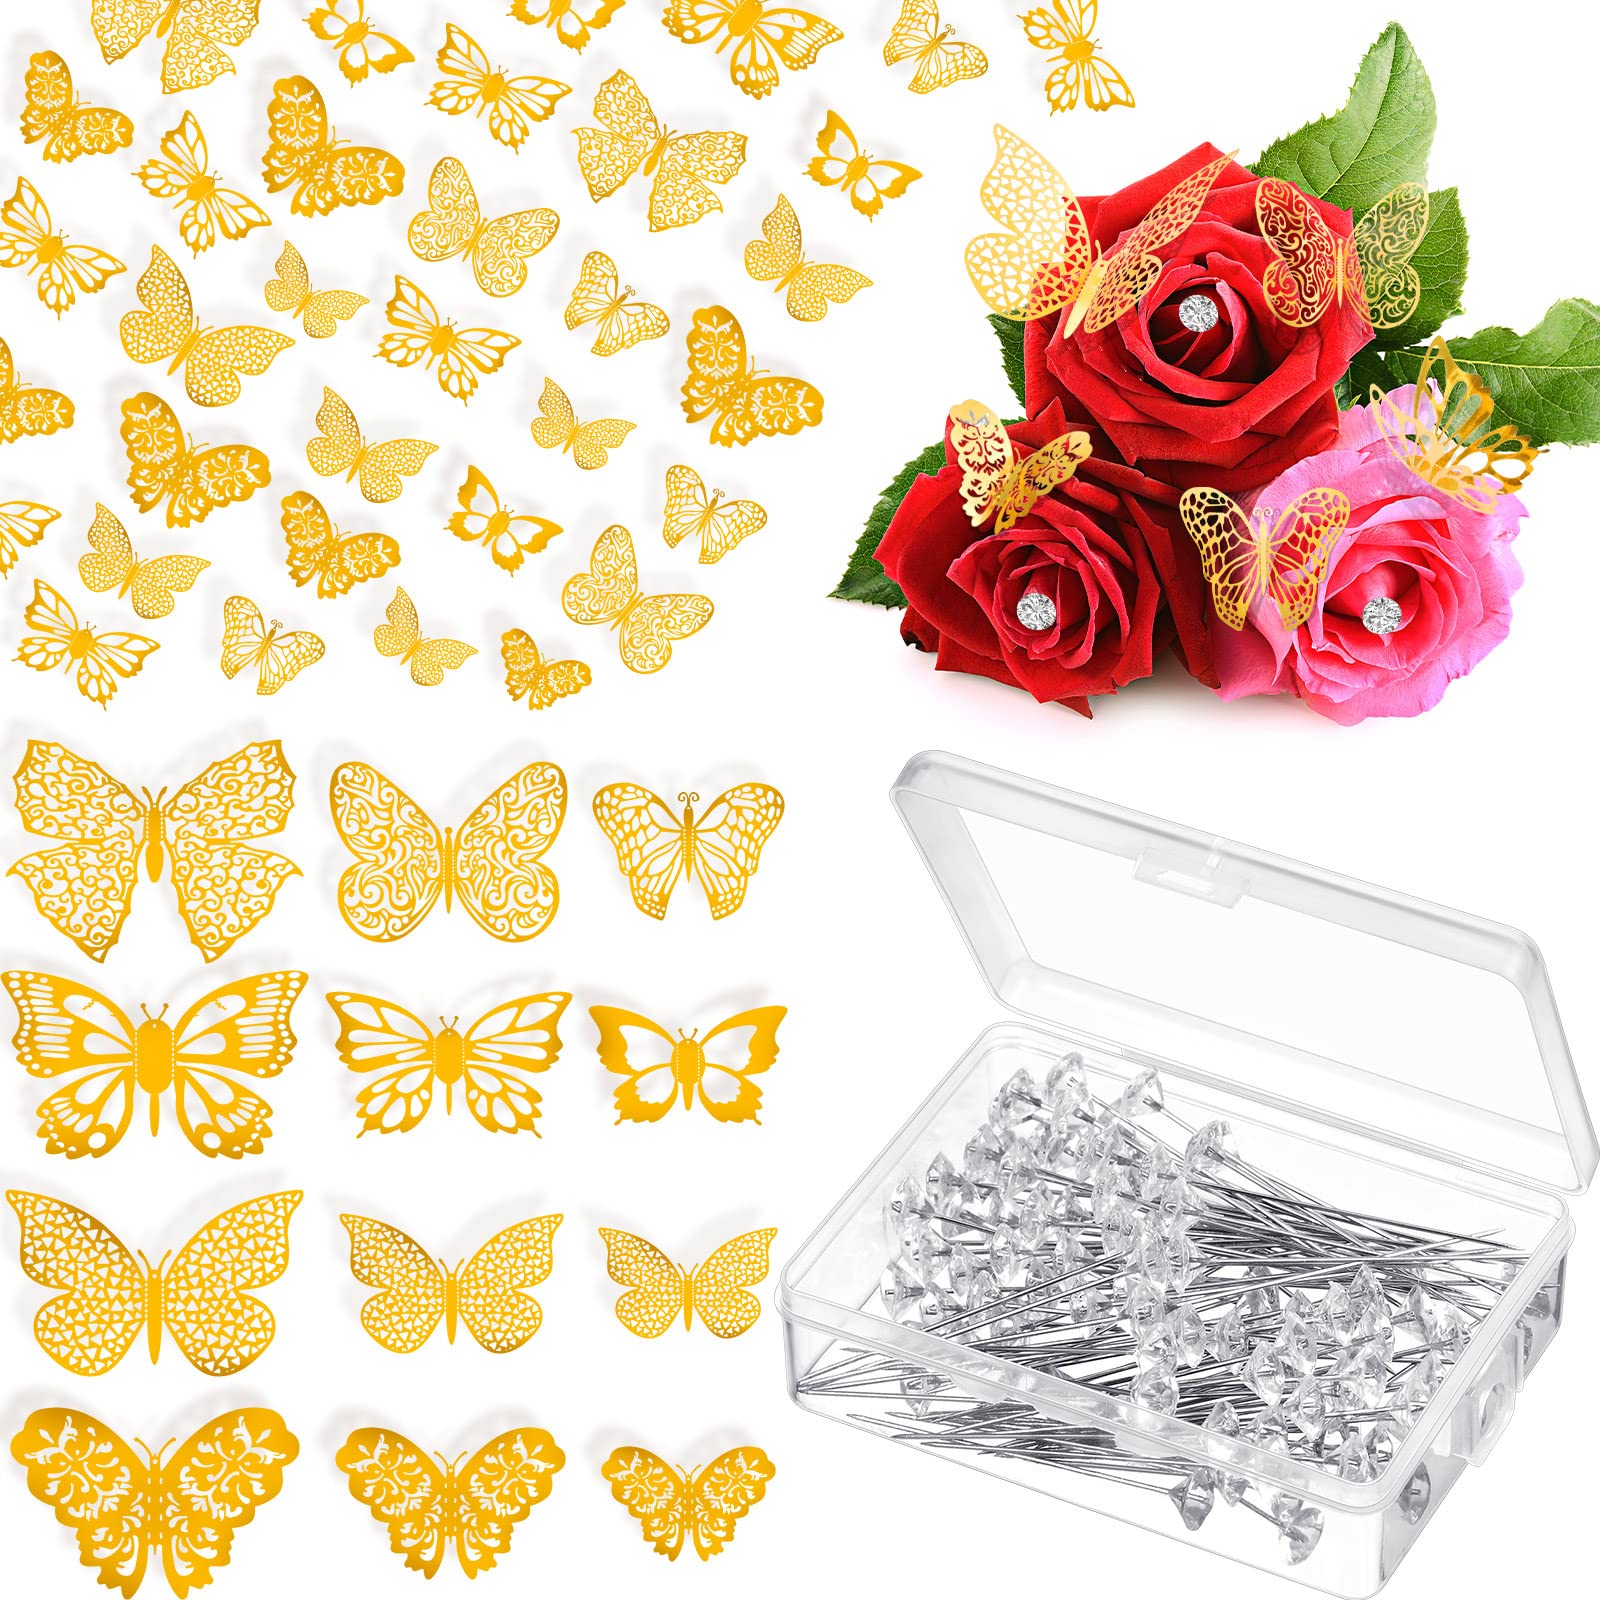 148 Pcs Bouquet Corsages Pins for Flower and 3D Gold Butterfly Wall Decor  Set Flower Diamond Pins Pearl Pin Heads Butterfly Decal Floral Arrangements  Accessories for Mother's Day Wedding Party